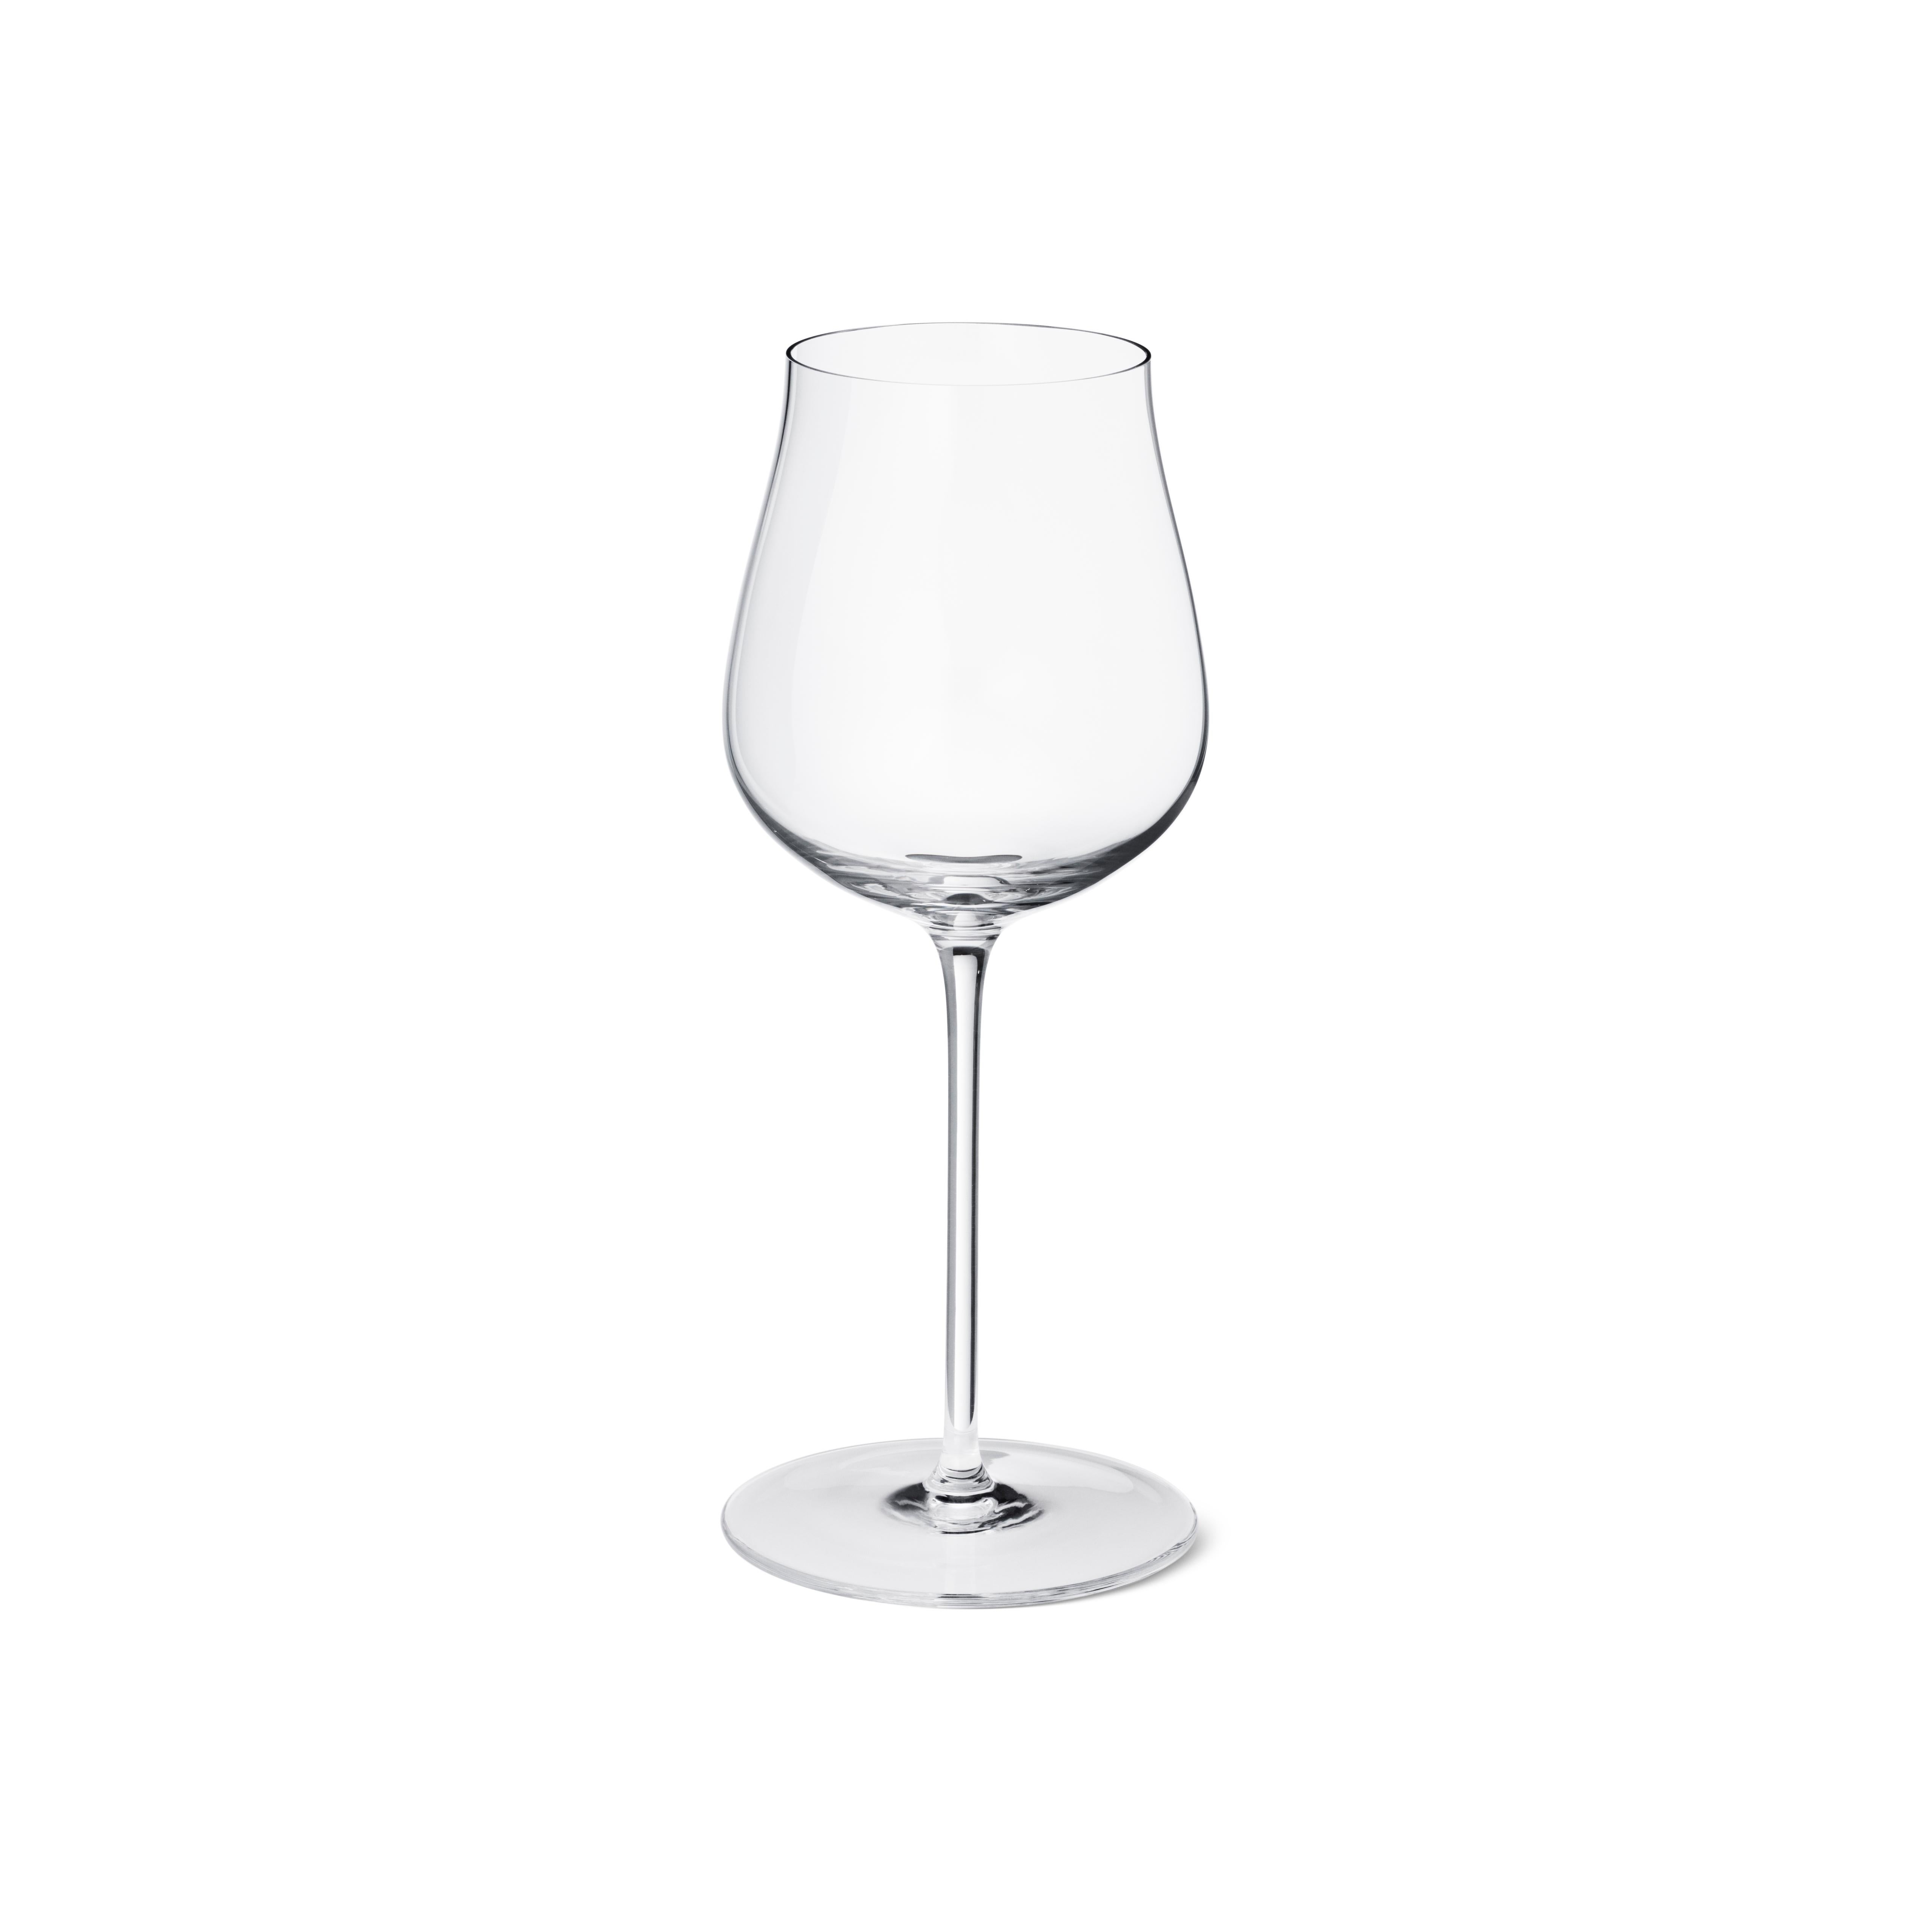 Good wine tastes even better when served in beautiful glasses! Bringing a stylish Scandinavian touch to the joy of sipping chilled white wine, these elegant lead-free crystal white wine glasses are stunning to look at but also easy to hold with